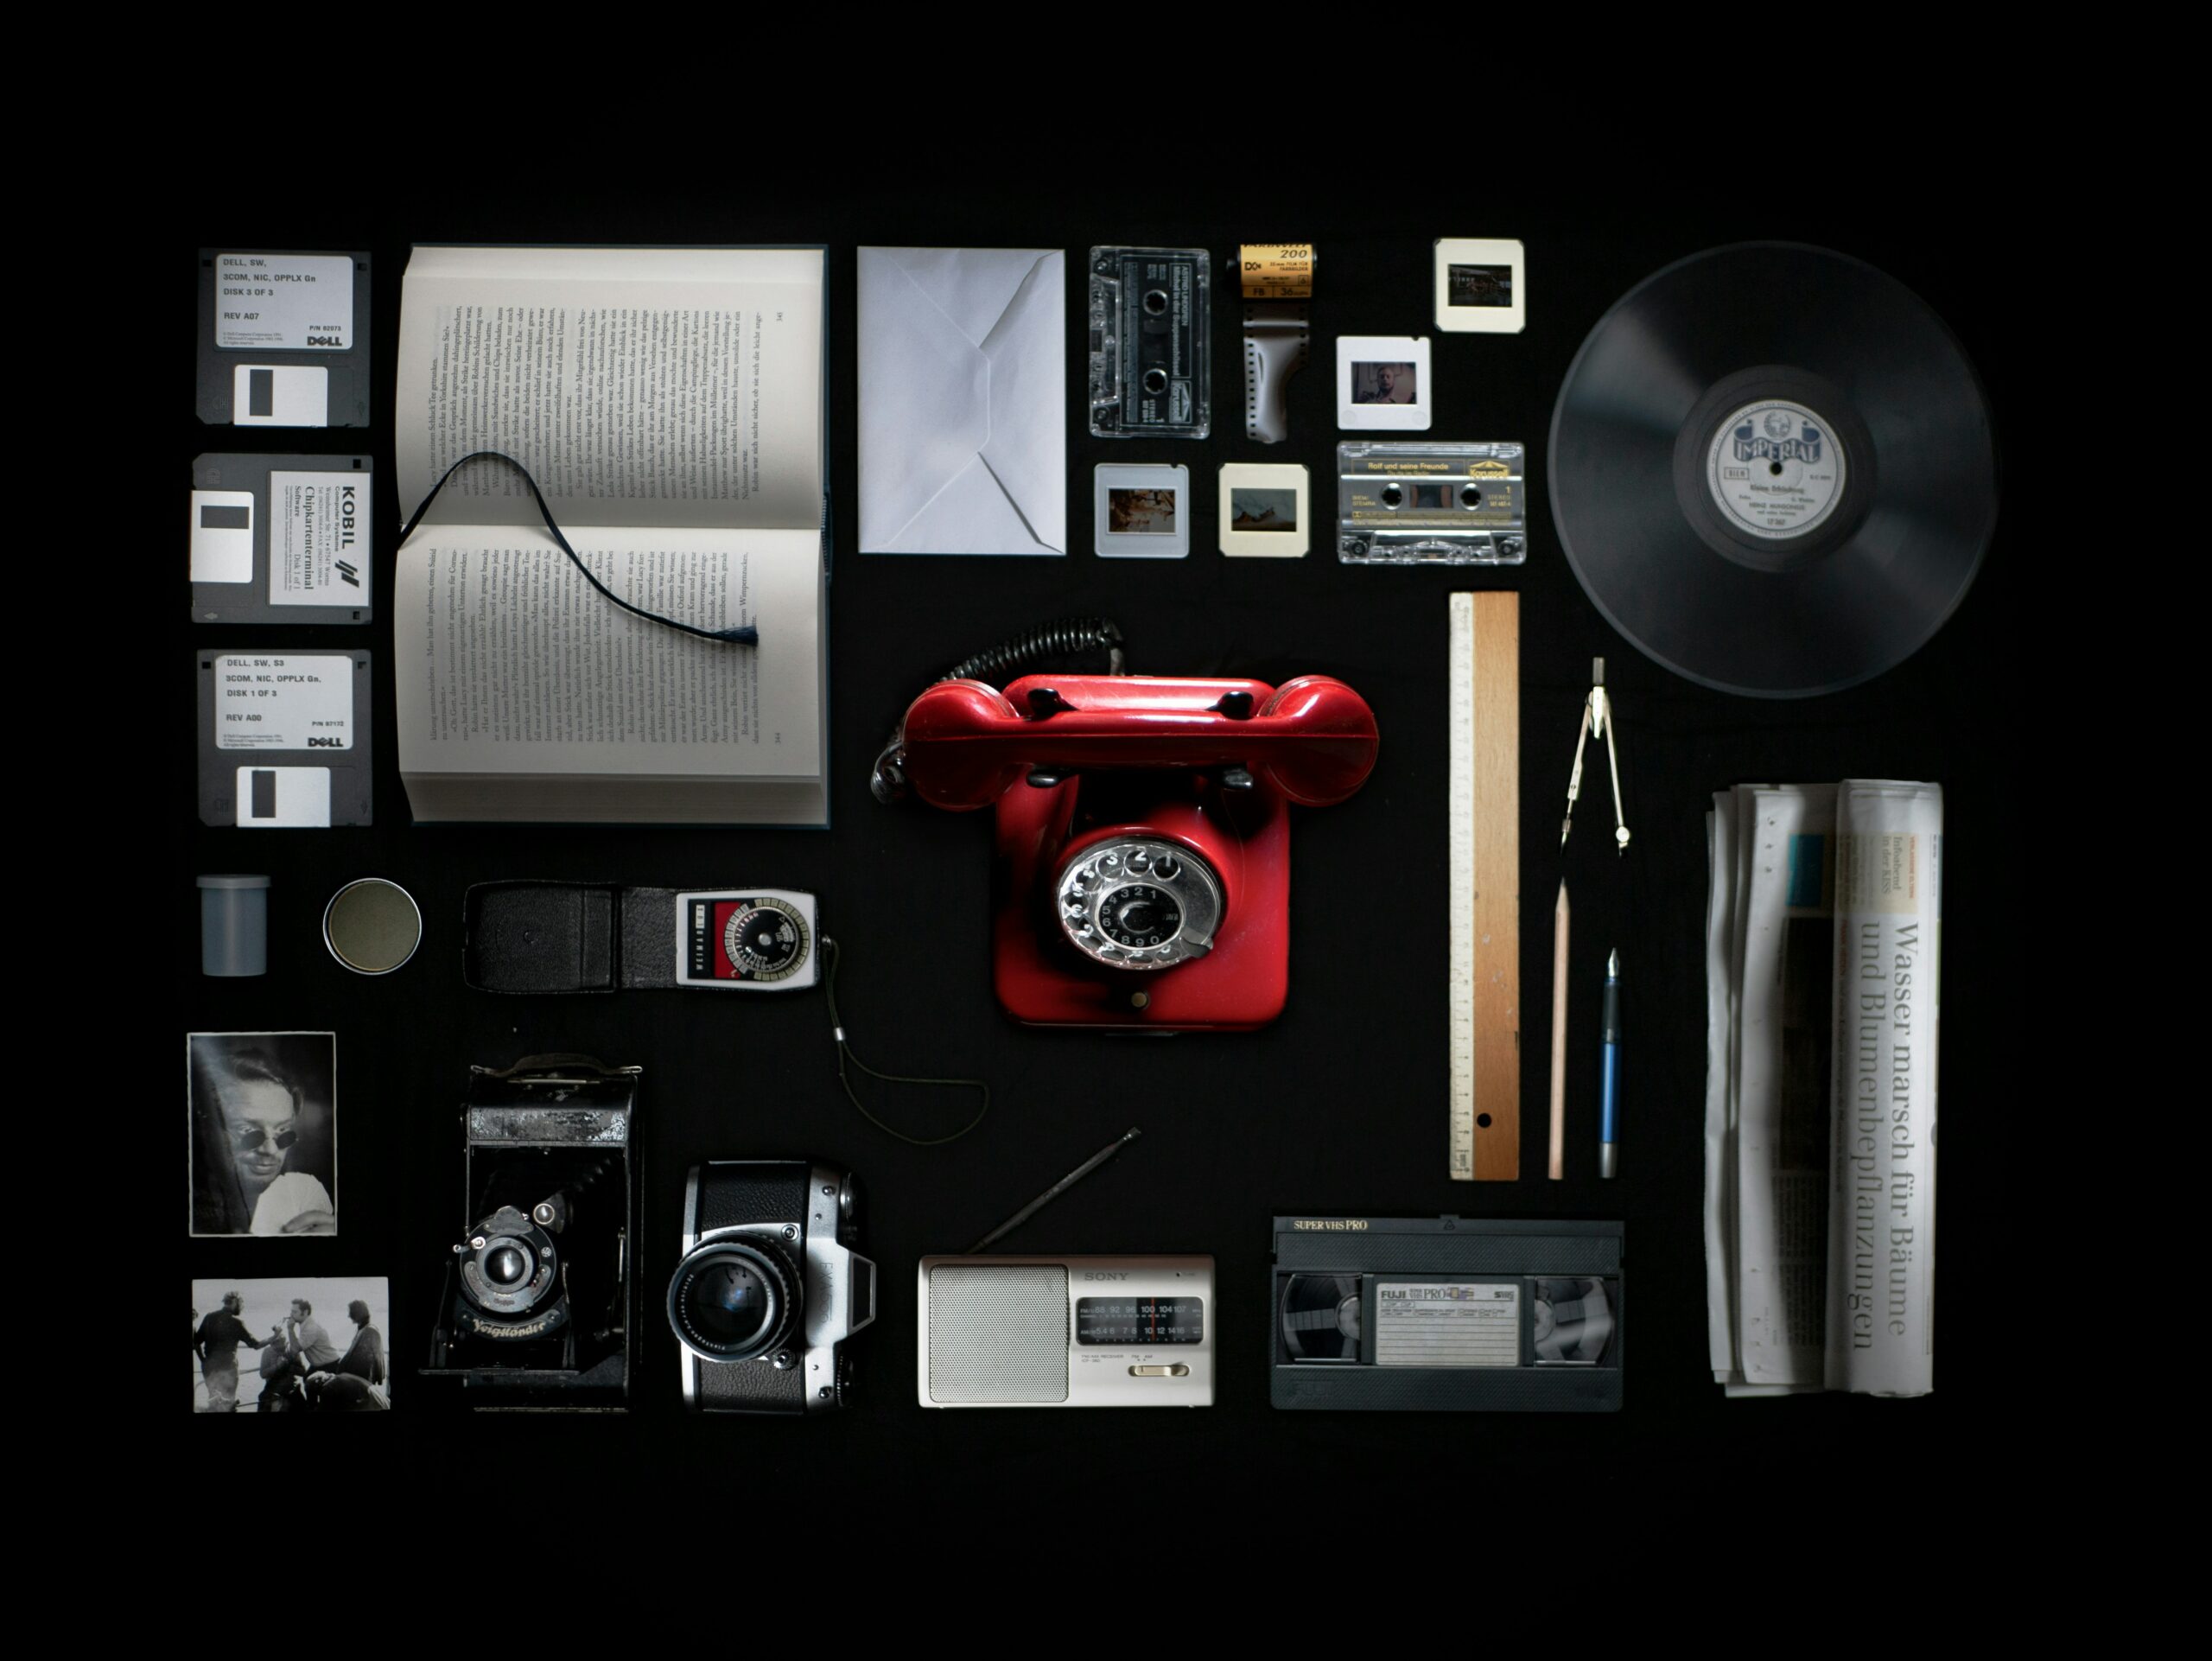 A photo of various forms of technology and digital media used for communication, such as a phone, book, letter, camera, tape etc.